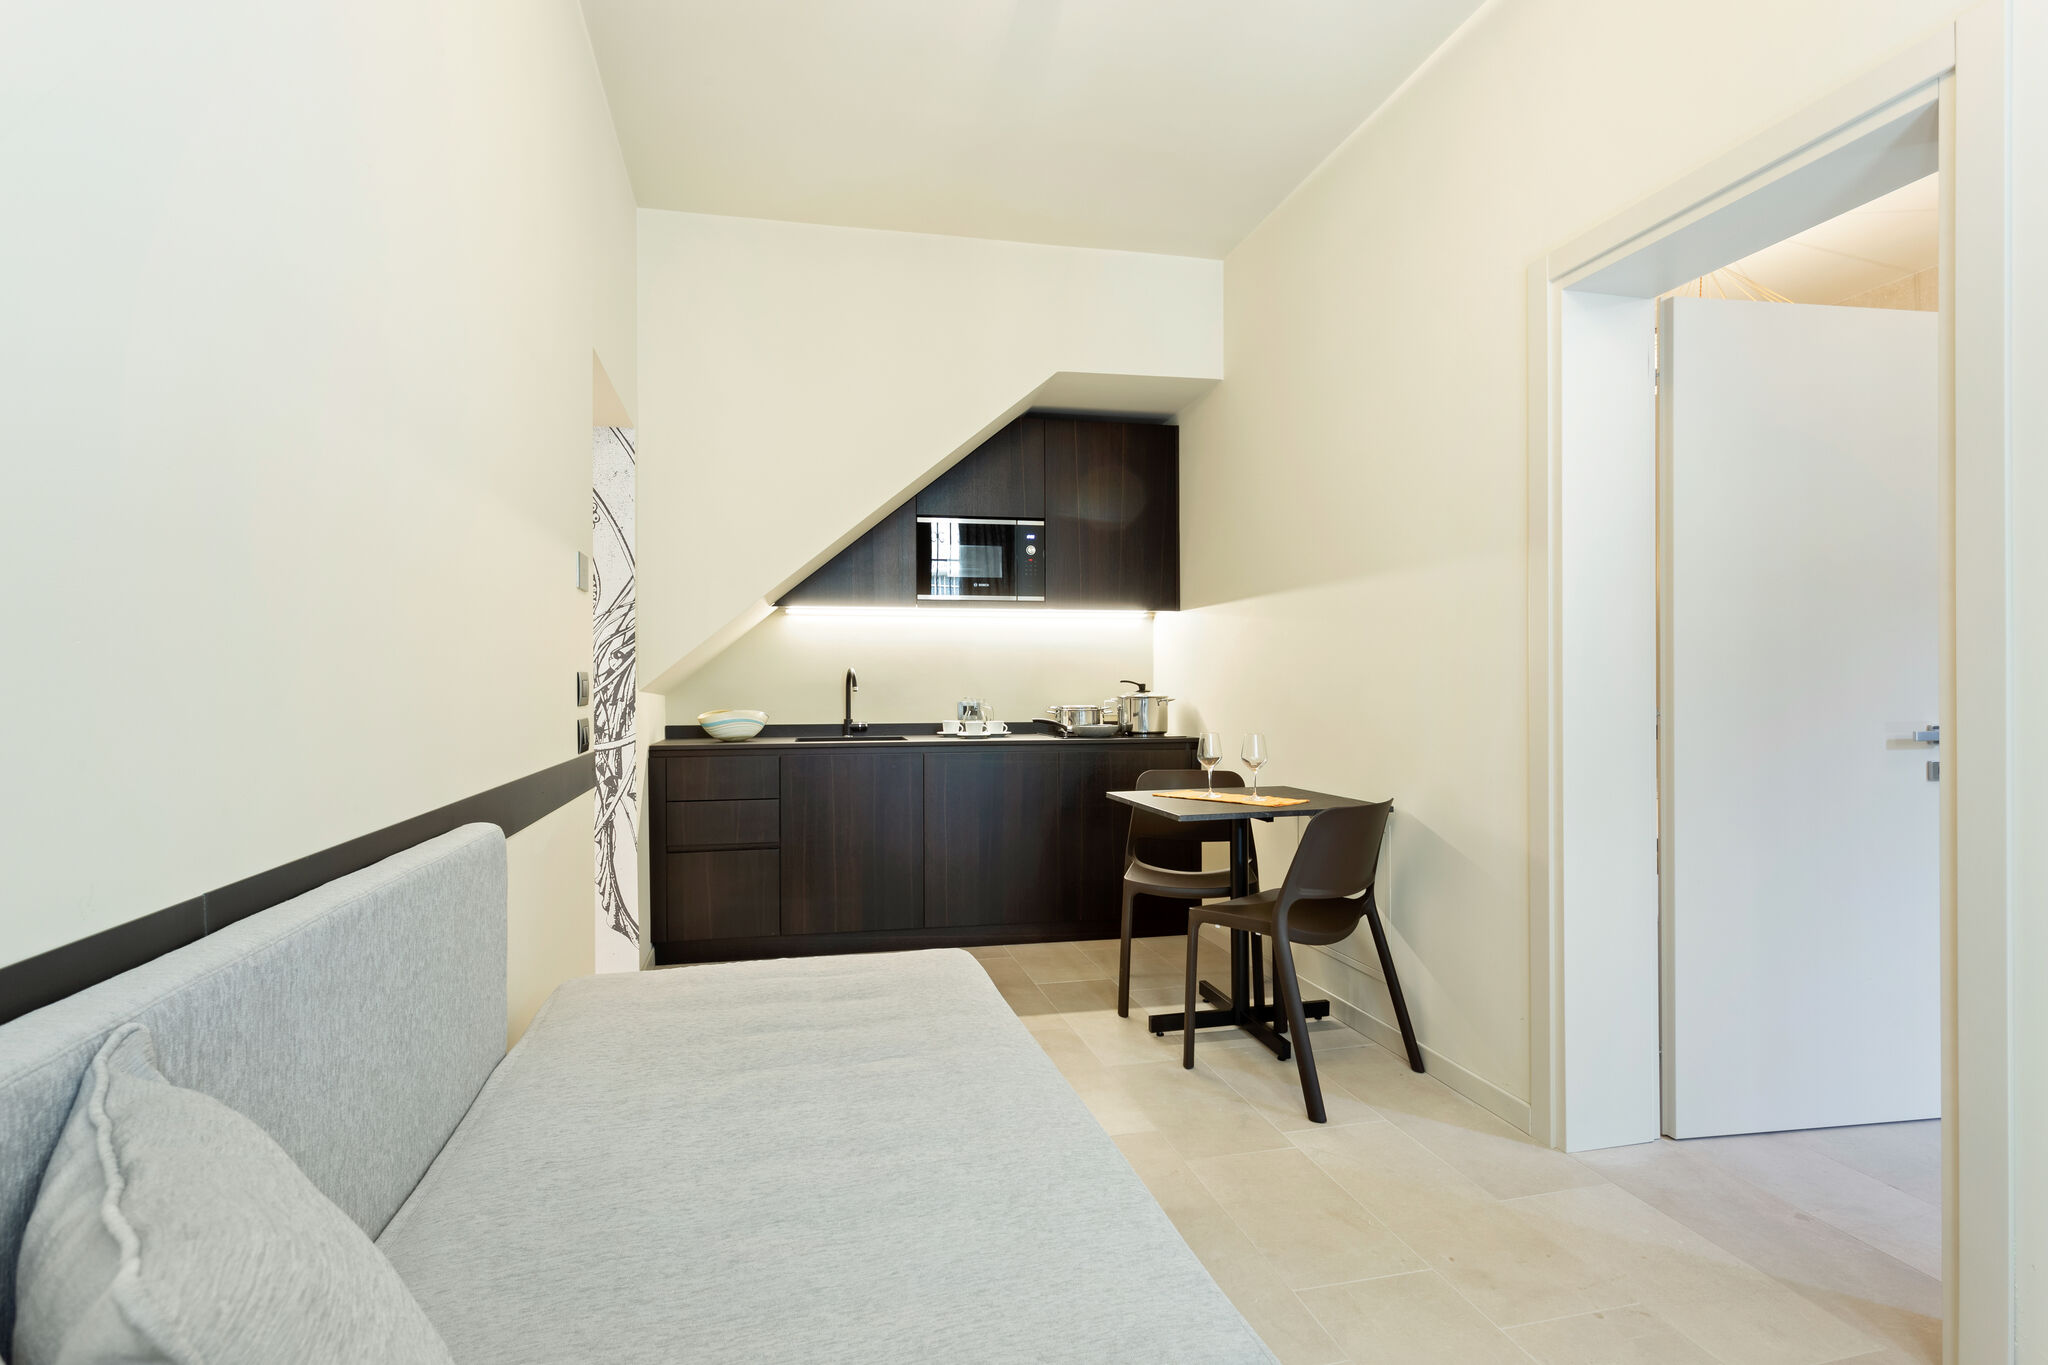 Brand new boutique apartment in the heart of Venice